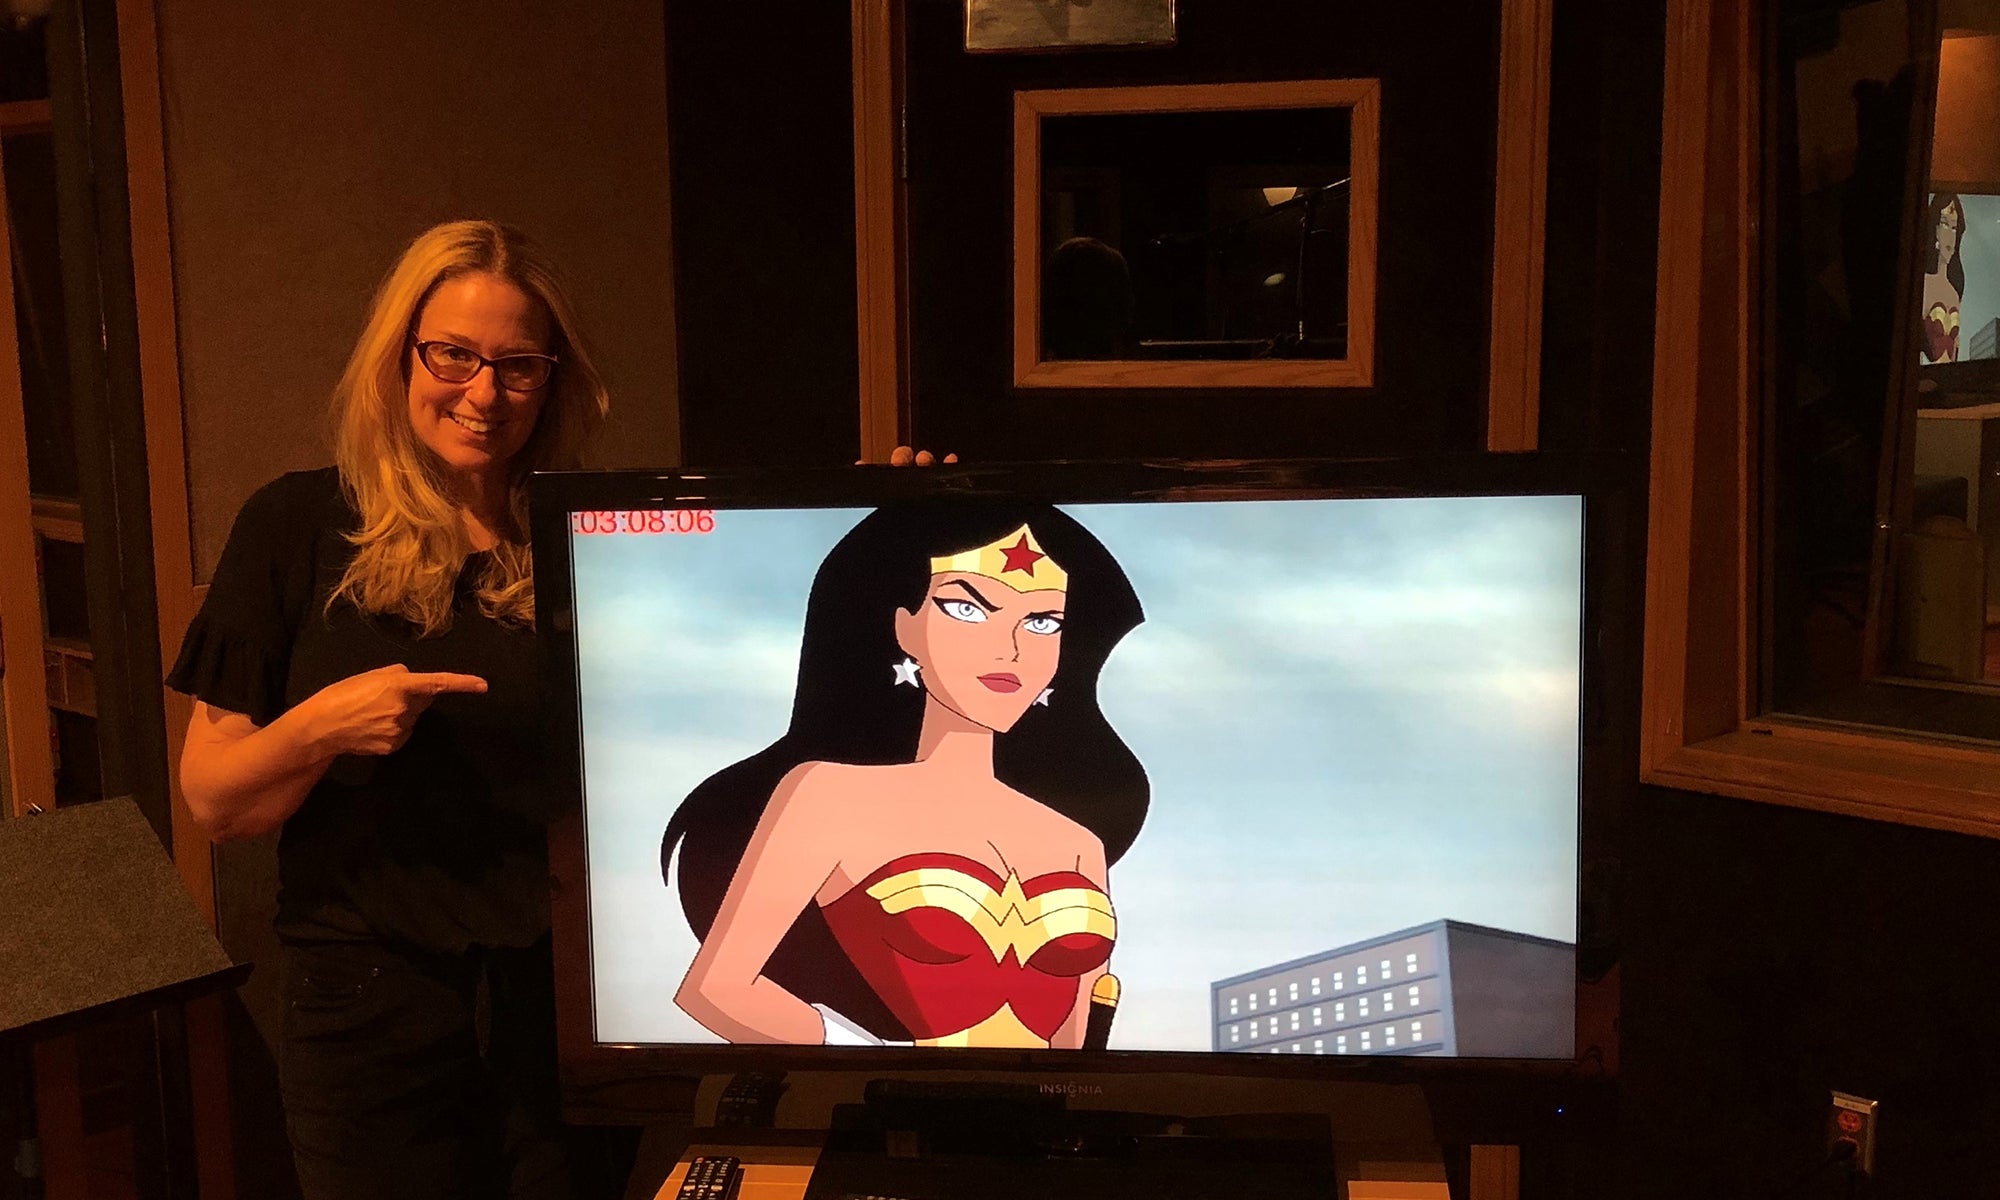 Voice actor Susan Eisenberg standing next to a TV with an image of Wonder Woman, a superhero, standing